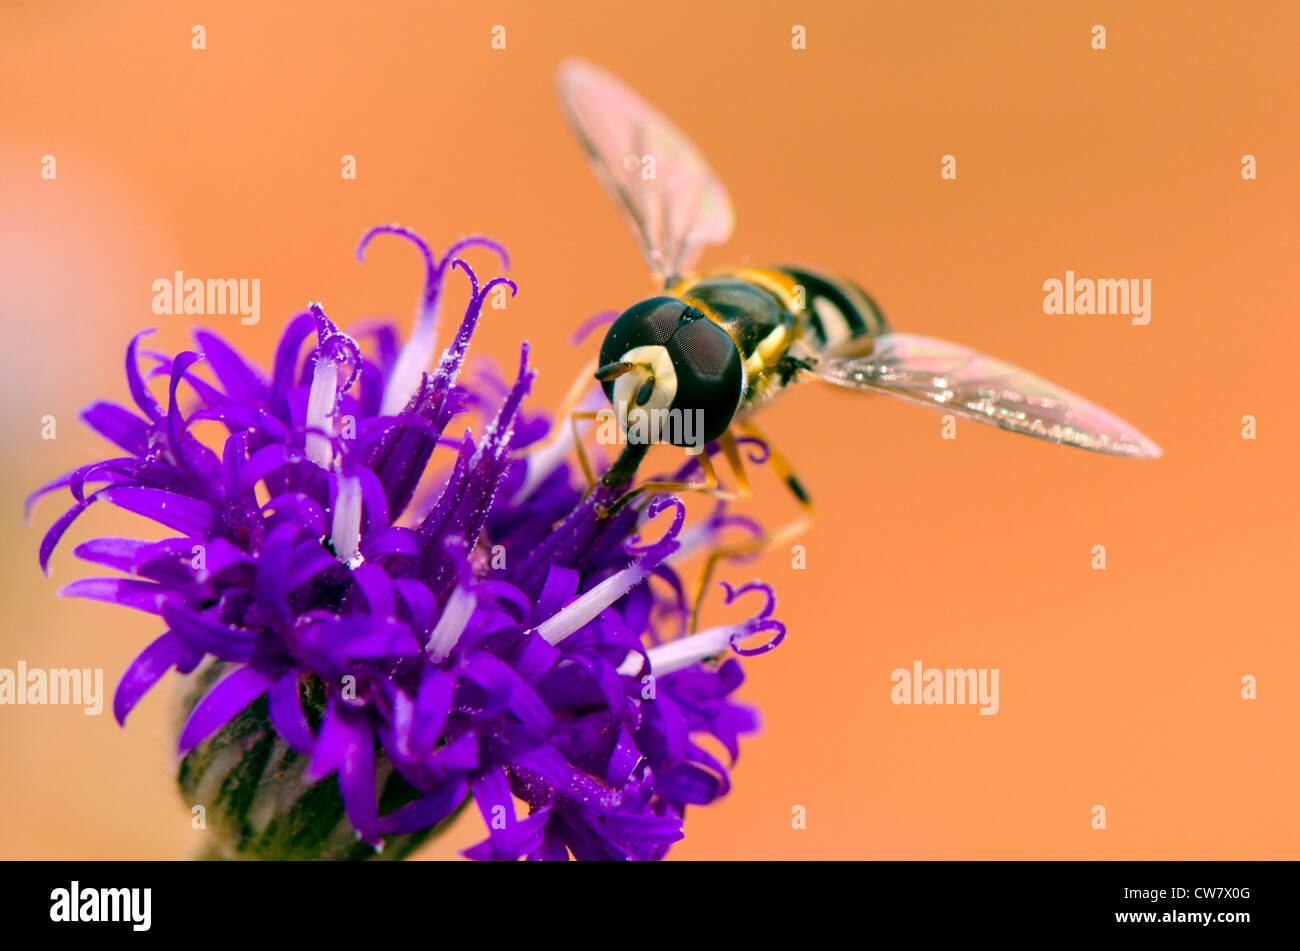 Hoverfly pollinating a flower Stock Photo